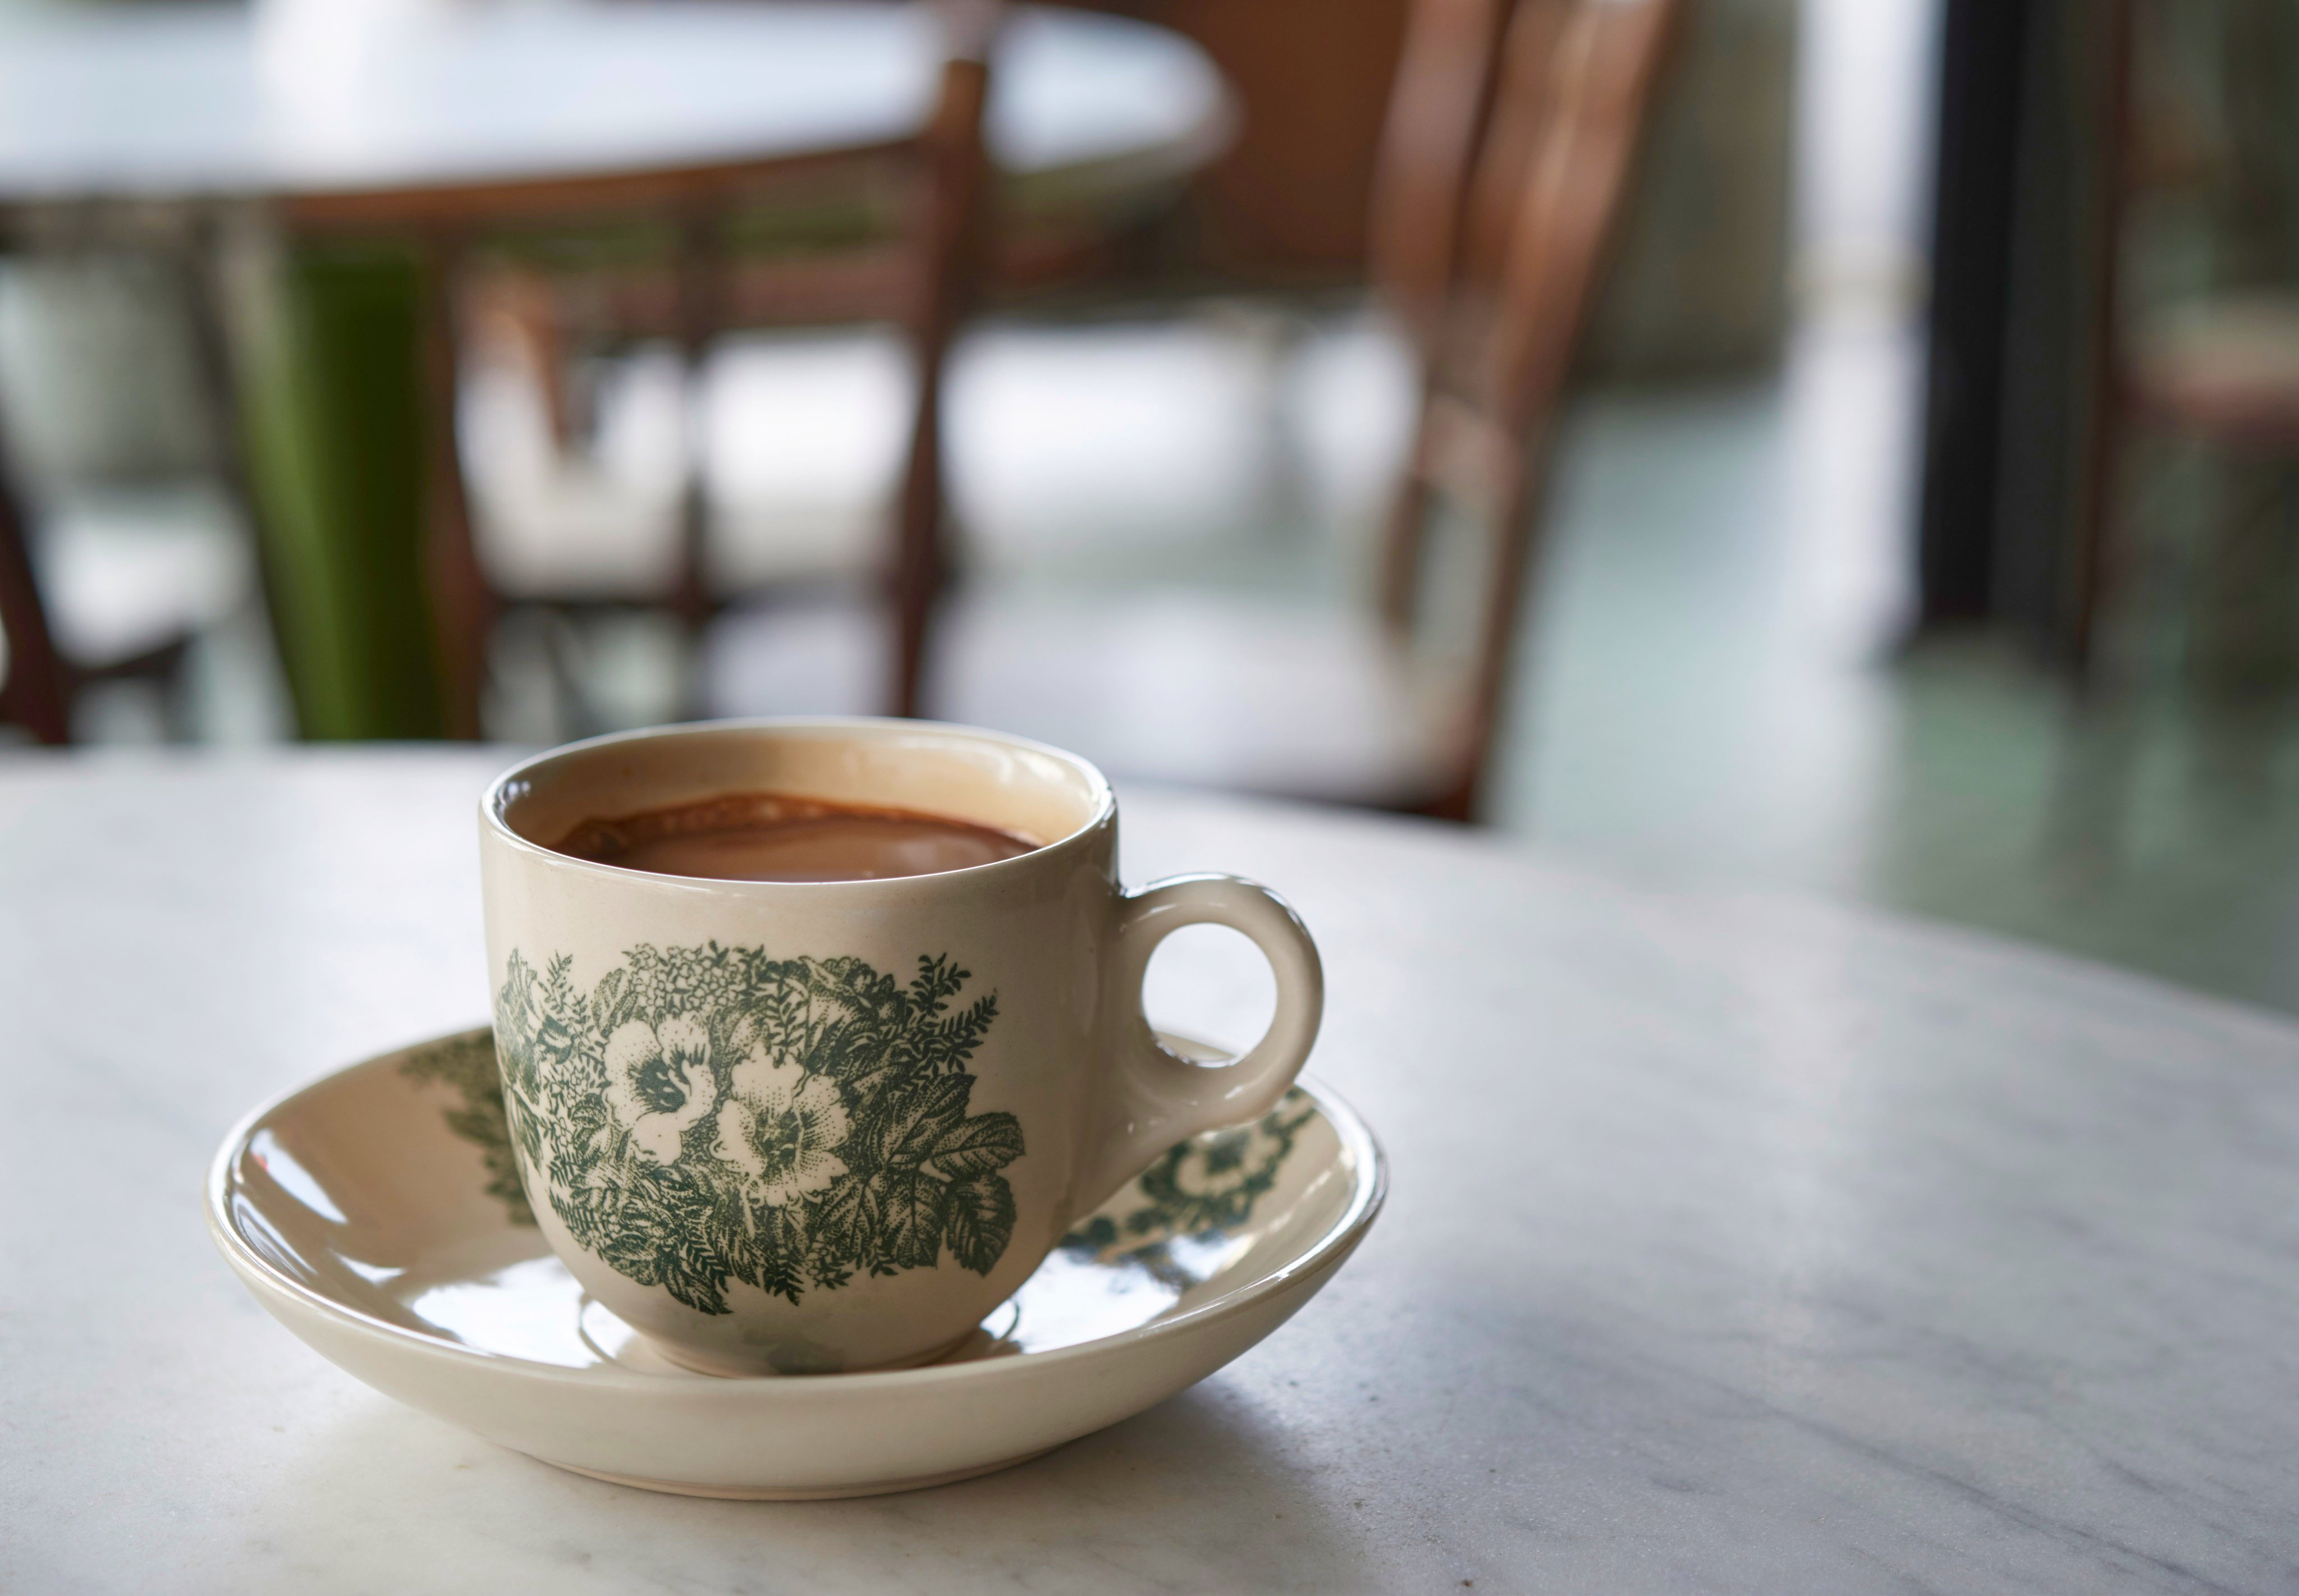 A Penang kopitiam-style coffee. Photo: Getty Images